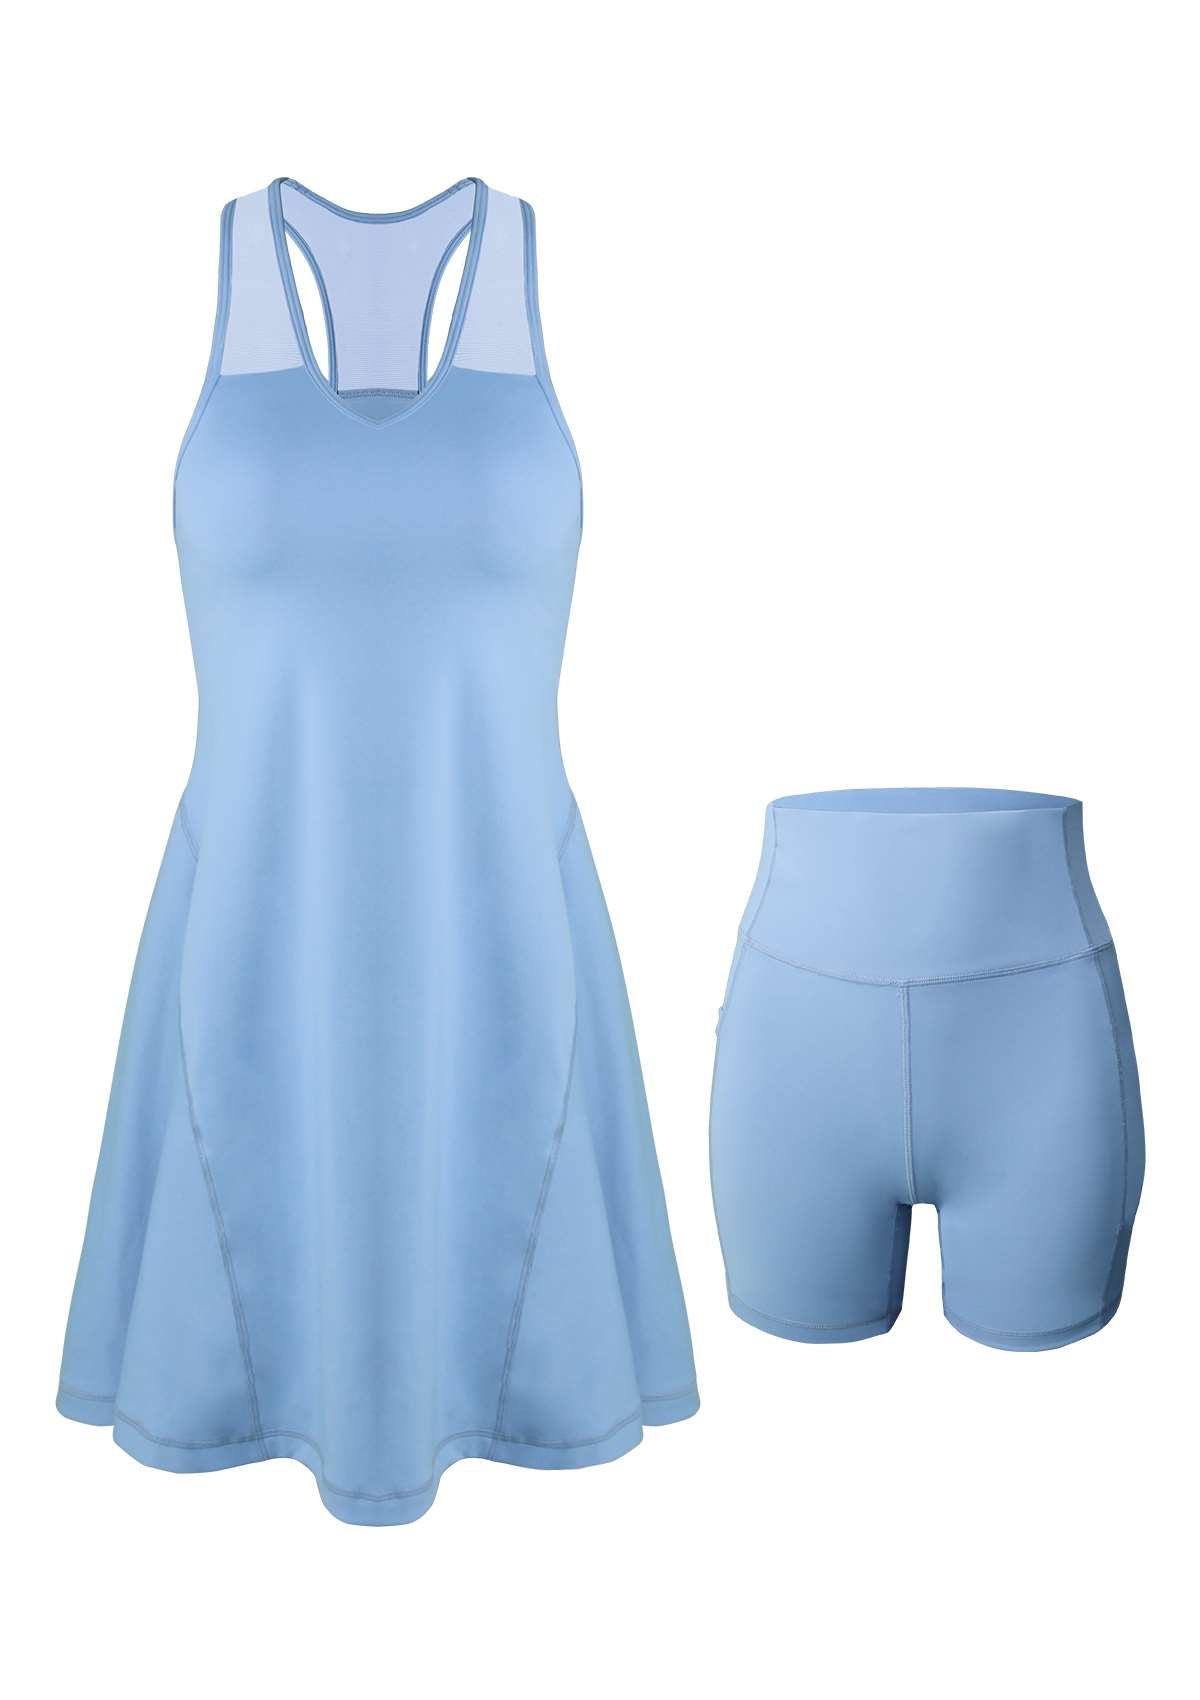 SONGFUL On The Move Sports Dress With Shorts Set - S / Blue